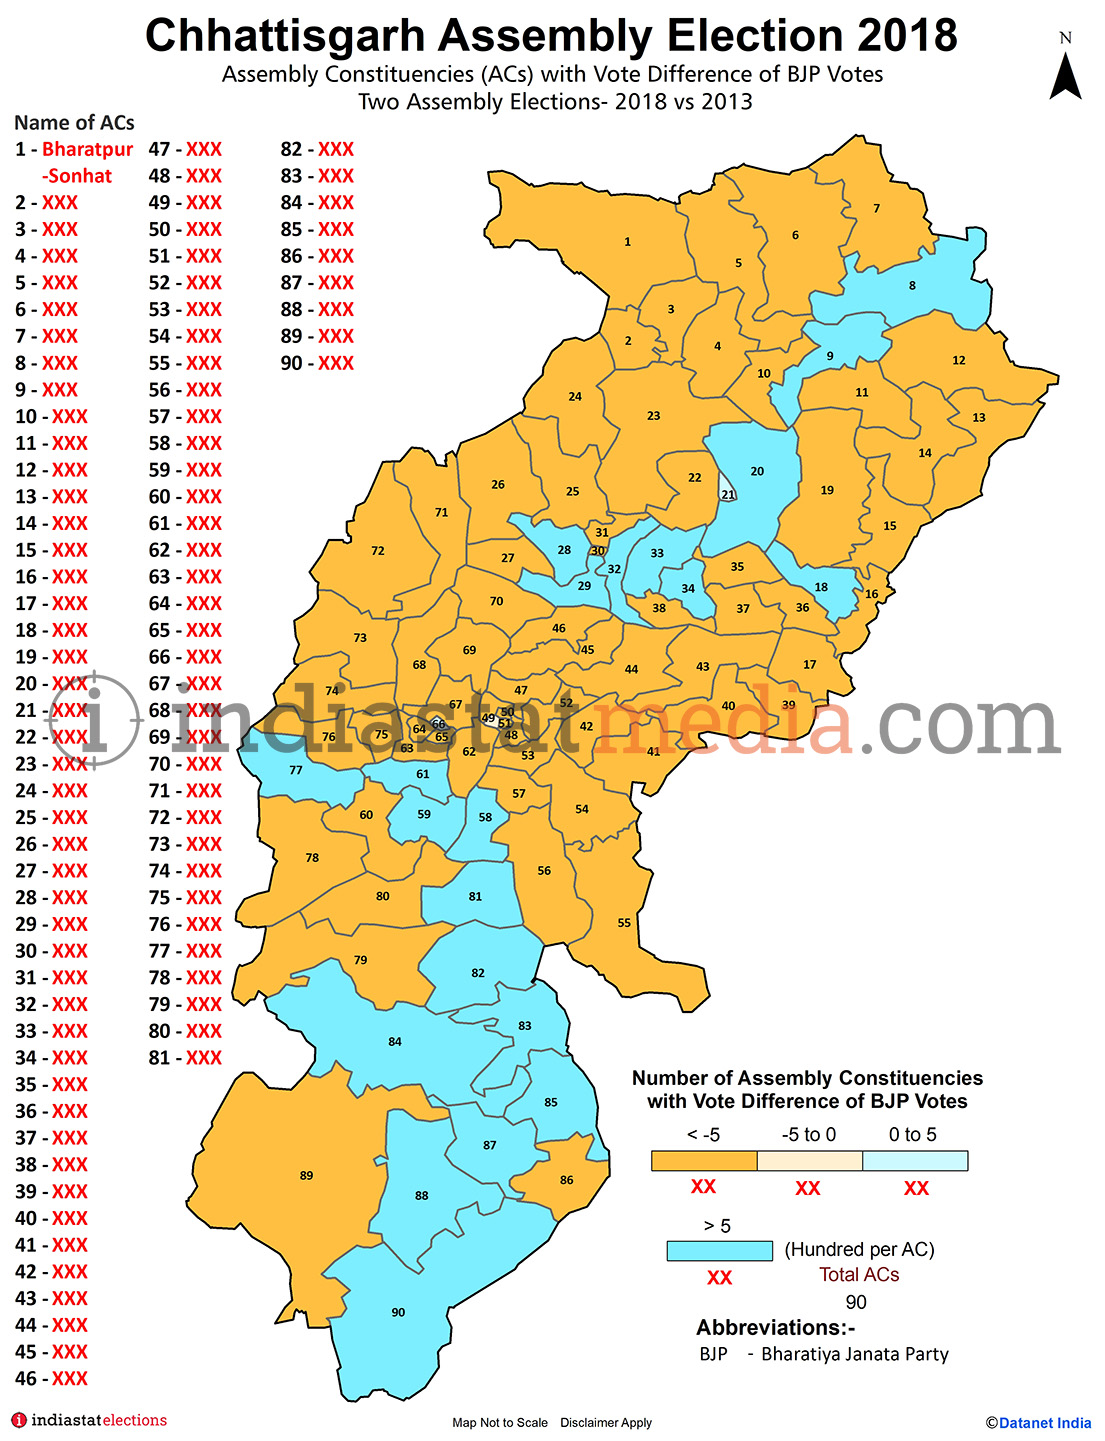 Assembly Constituencies with Vote Difference of BJP Votes in Chhattisgarh (Assembly Elections - 2013 & 2018)